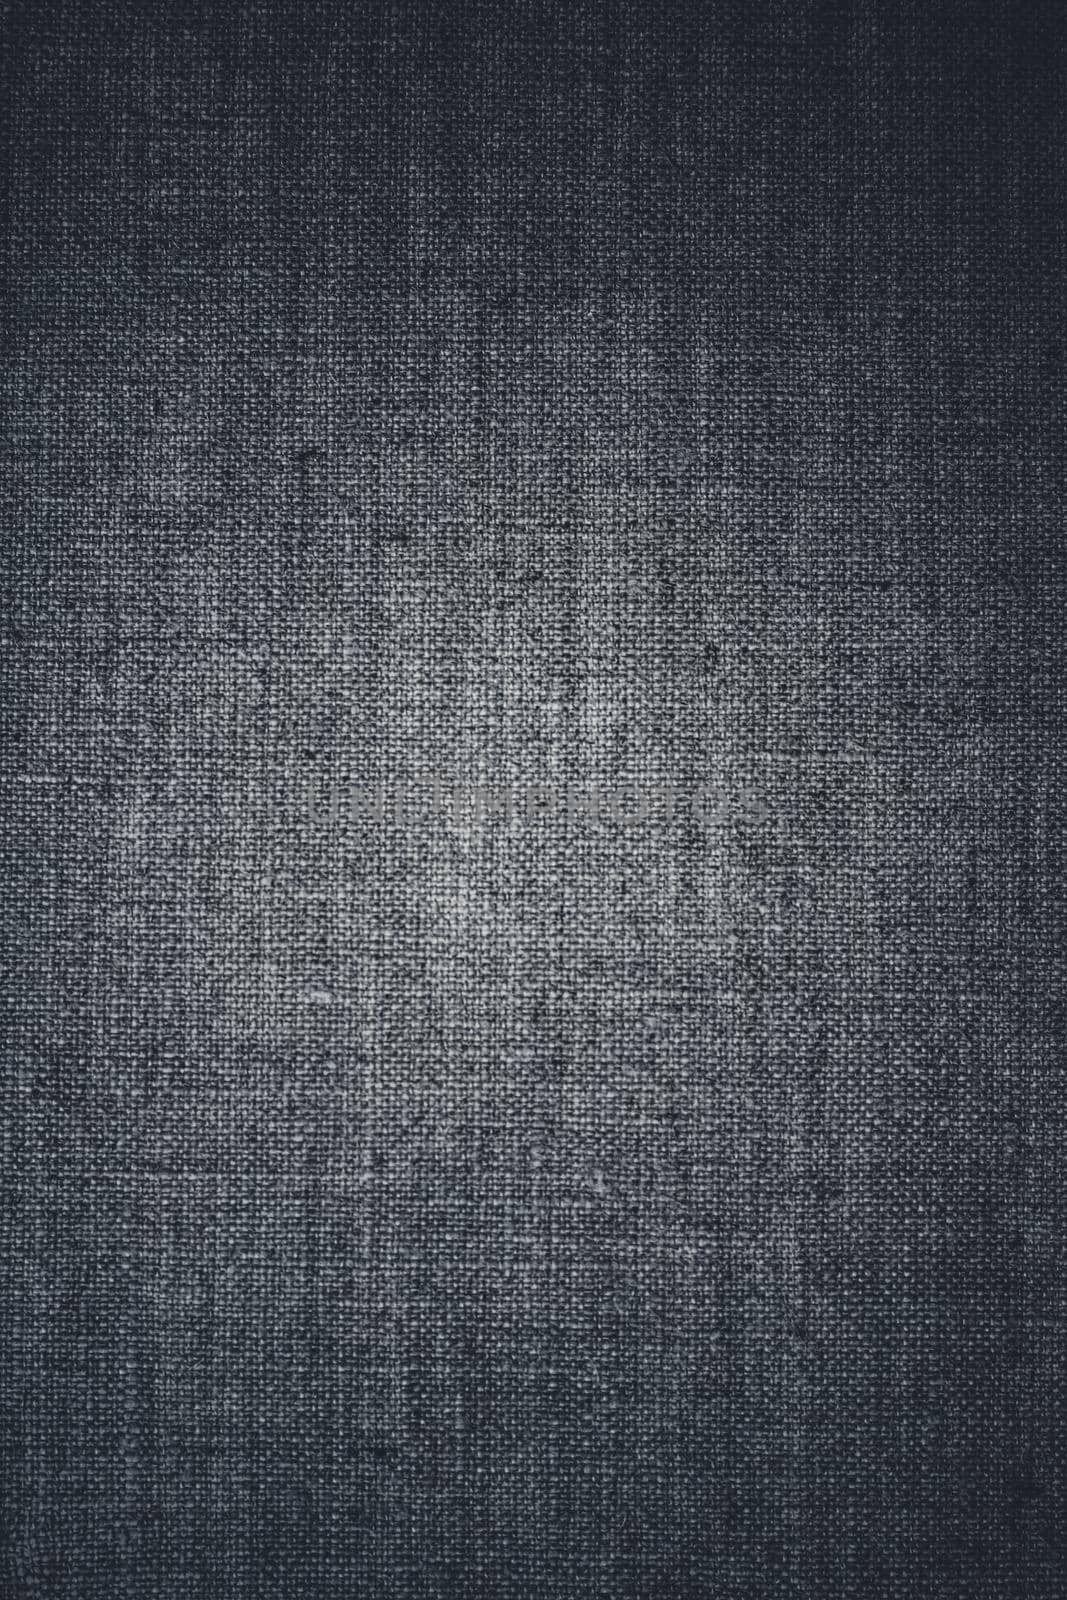 Decorative gray linen fabric textured background for interior, furniture design and art canvas backdrop by Anneleven